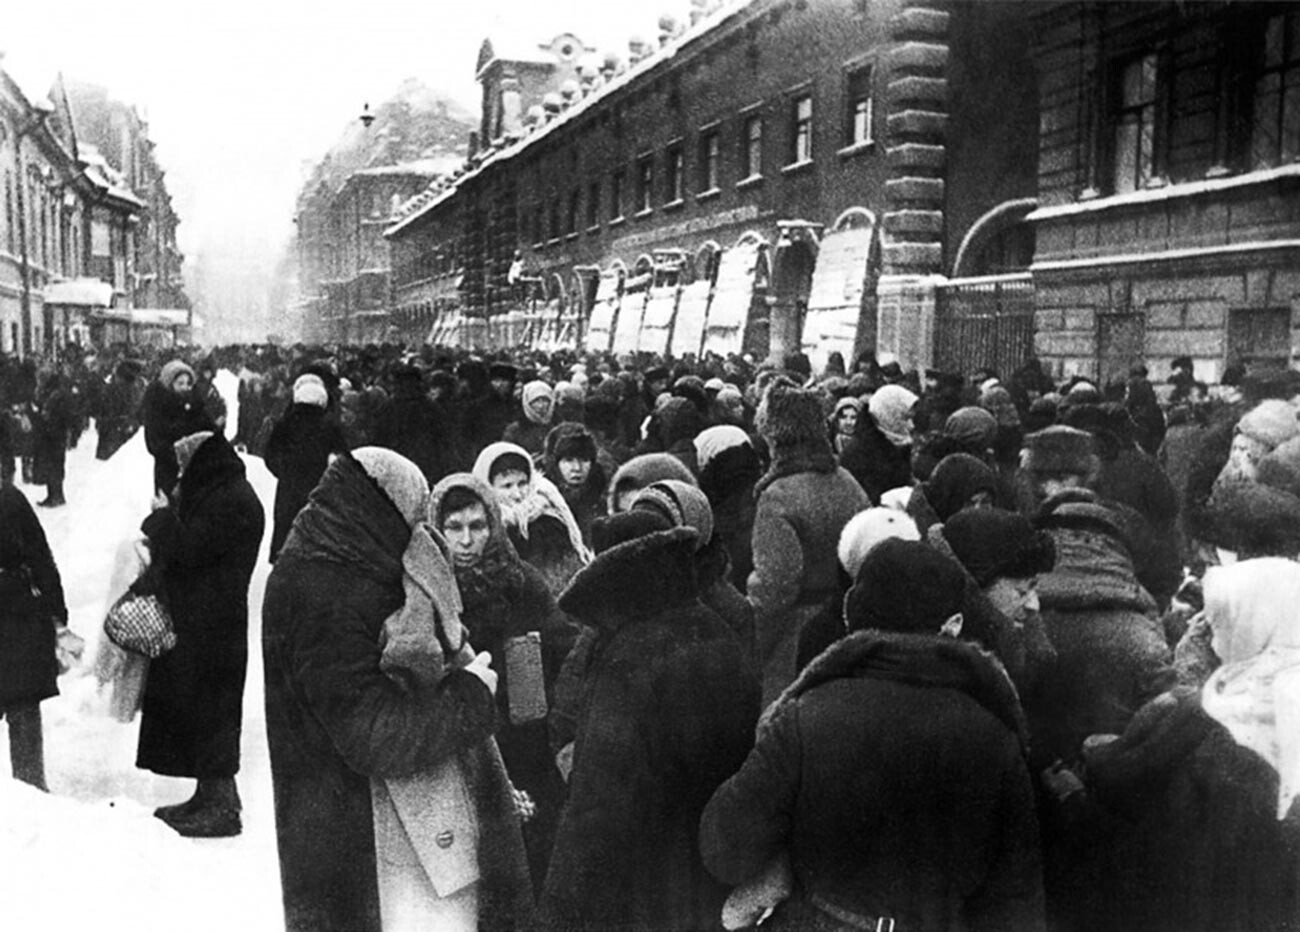 The Forge Market in besieged Leningrad.